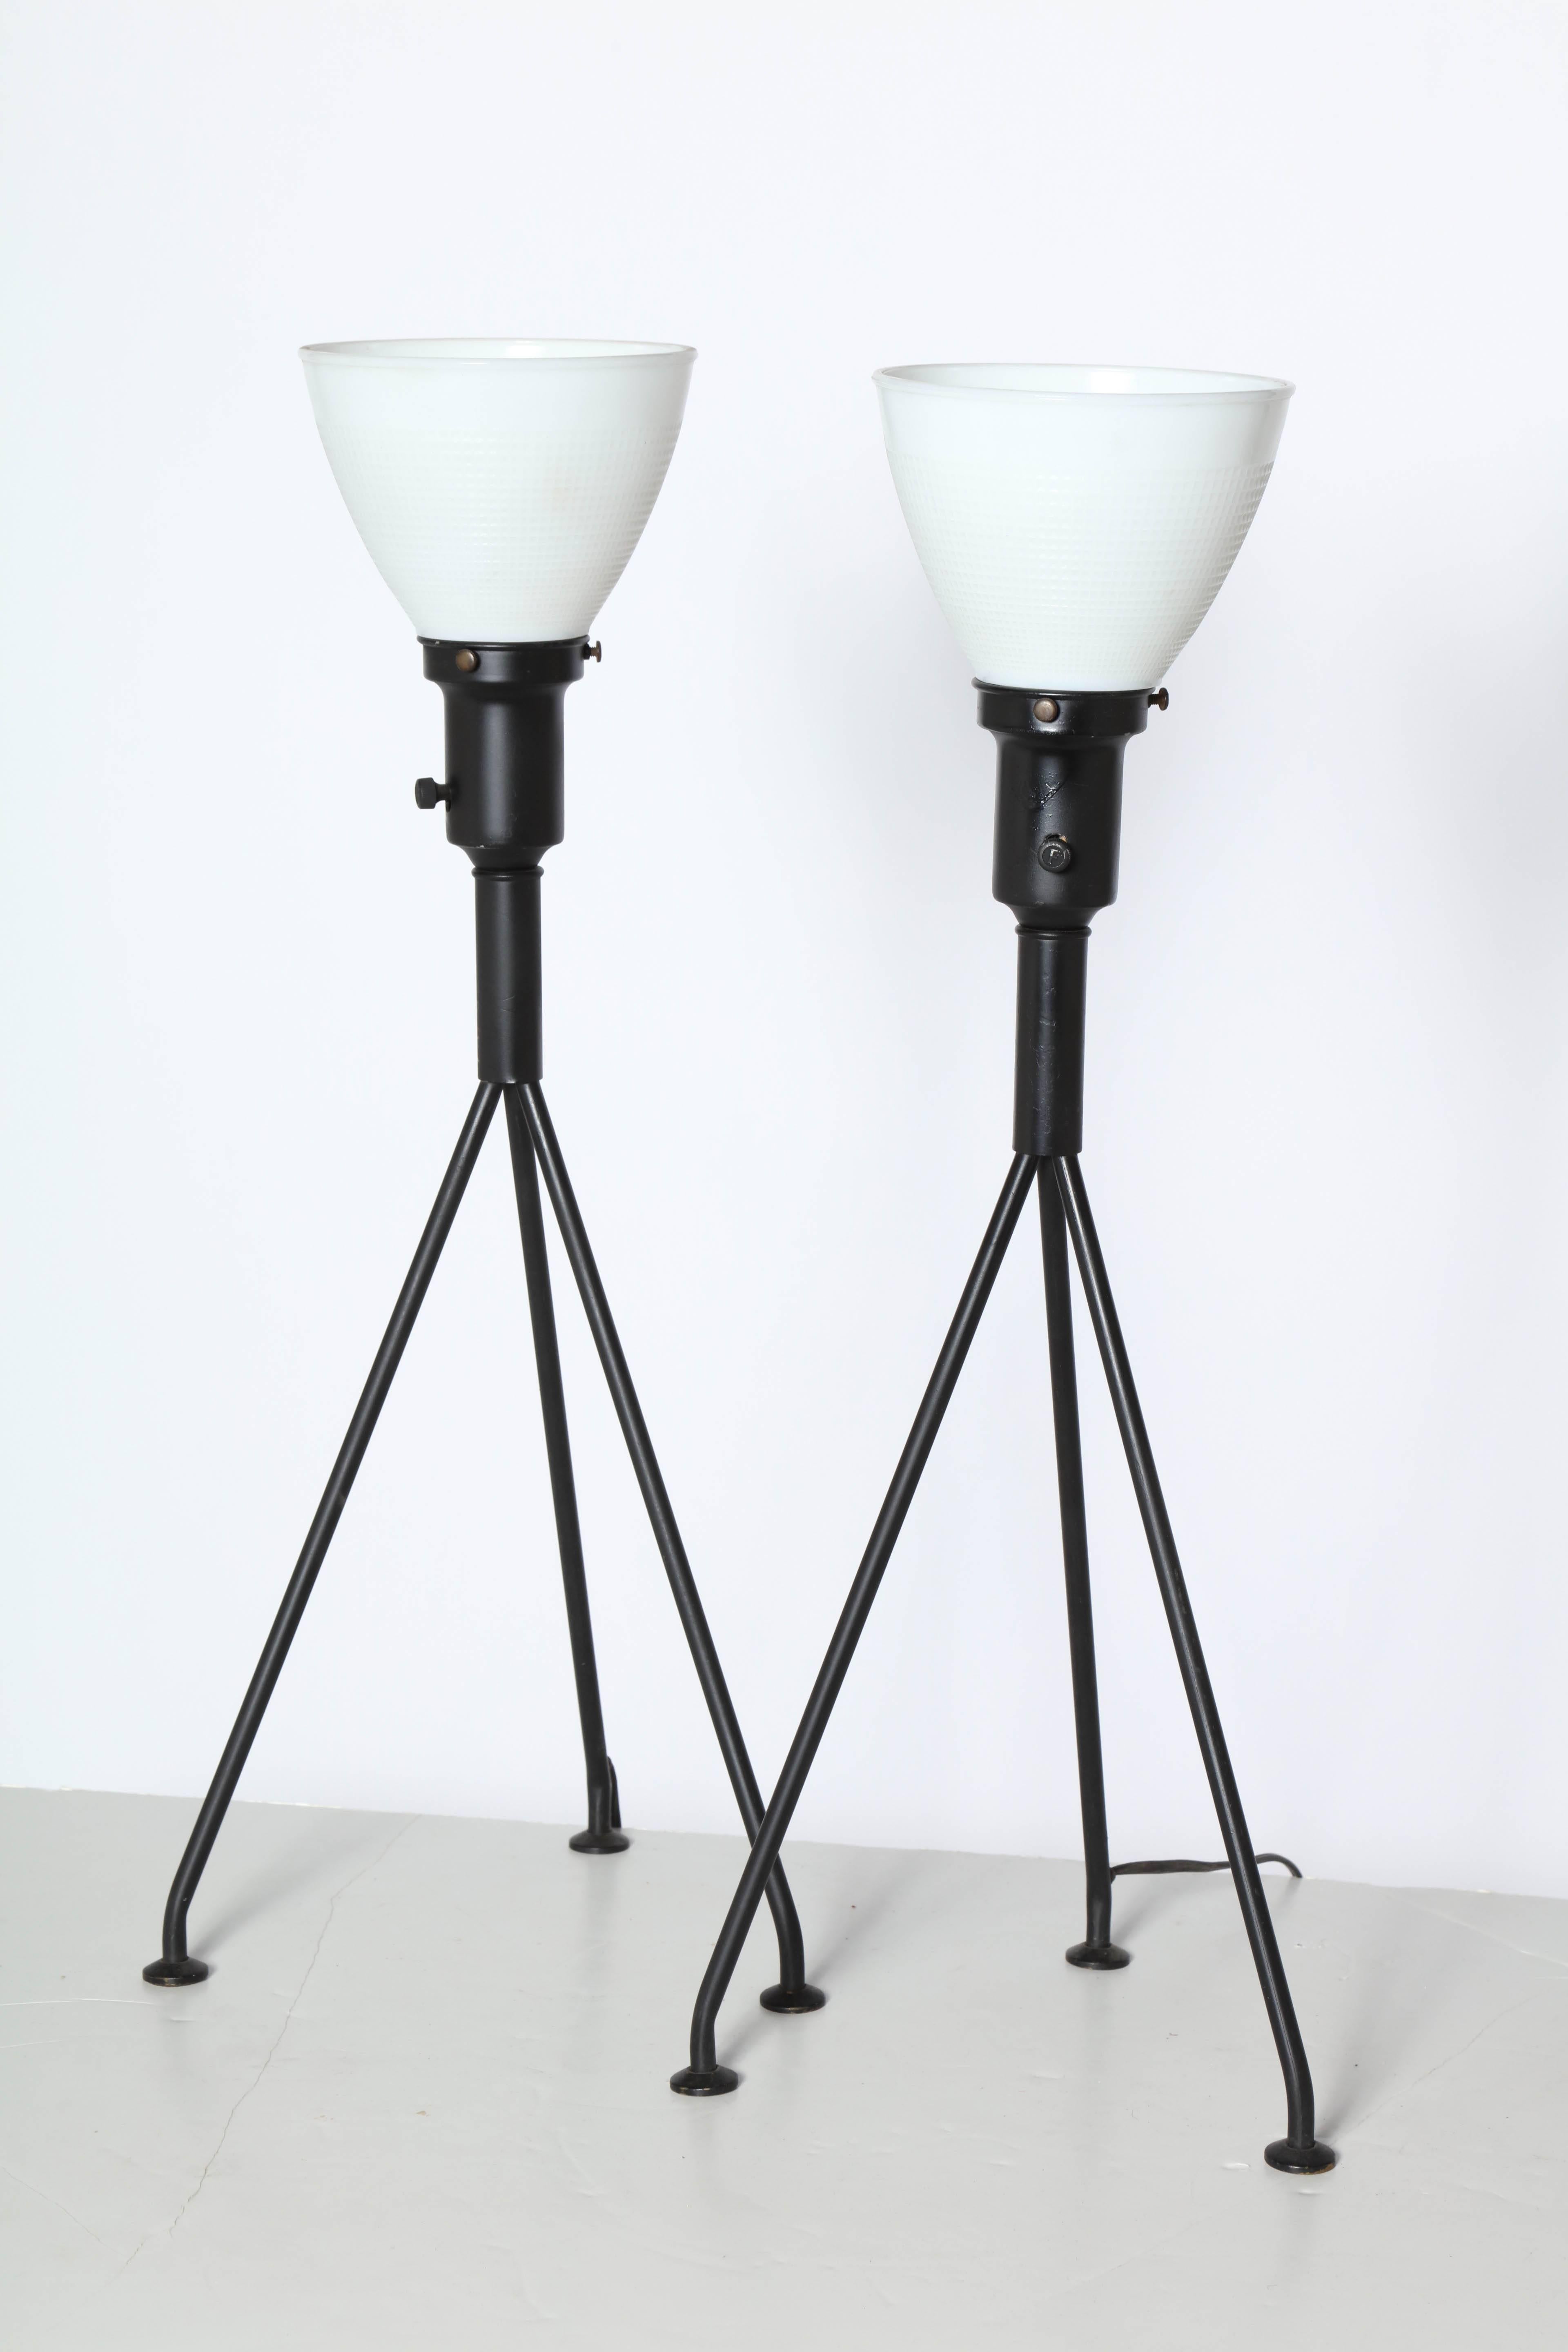 Mid-Century Modern Pair of Gerald Thurston Black Iron Tripod Table Lamps with White Glass Shades